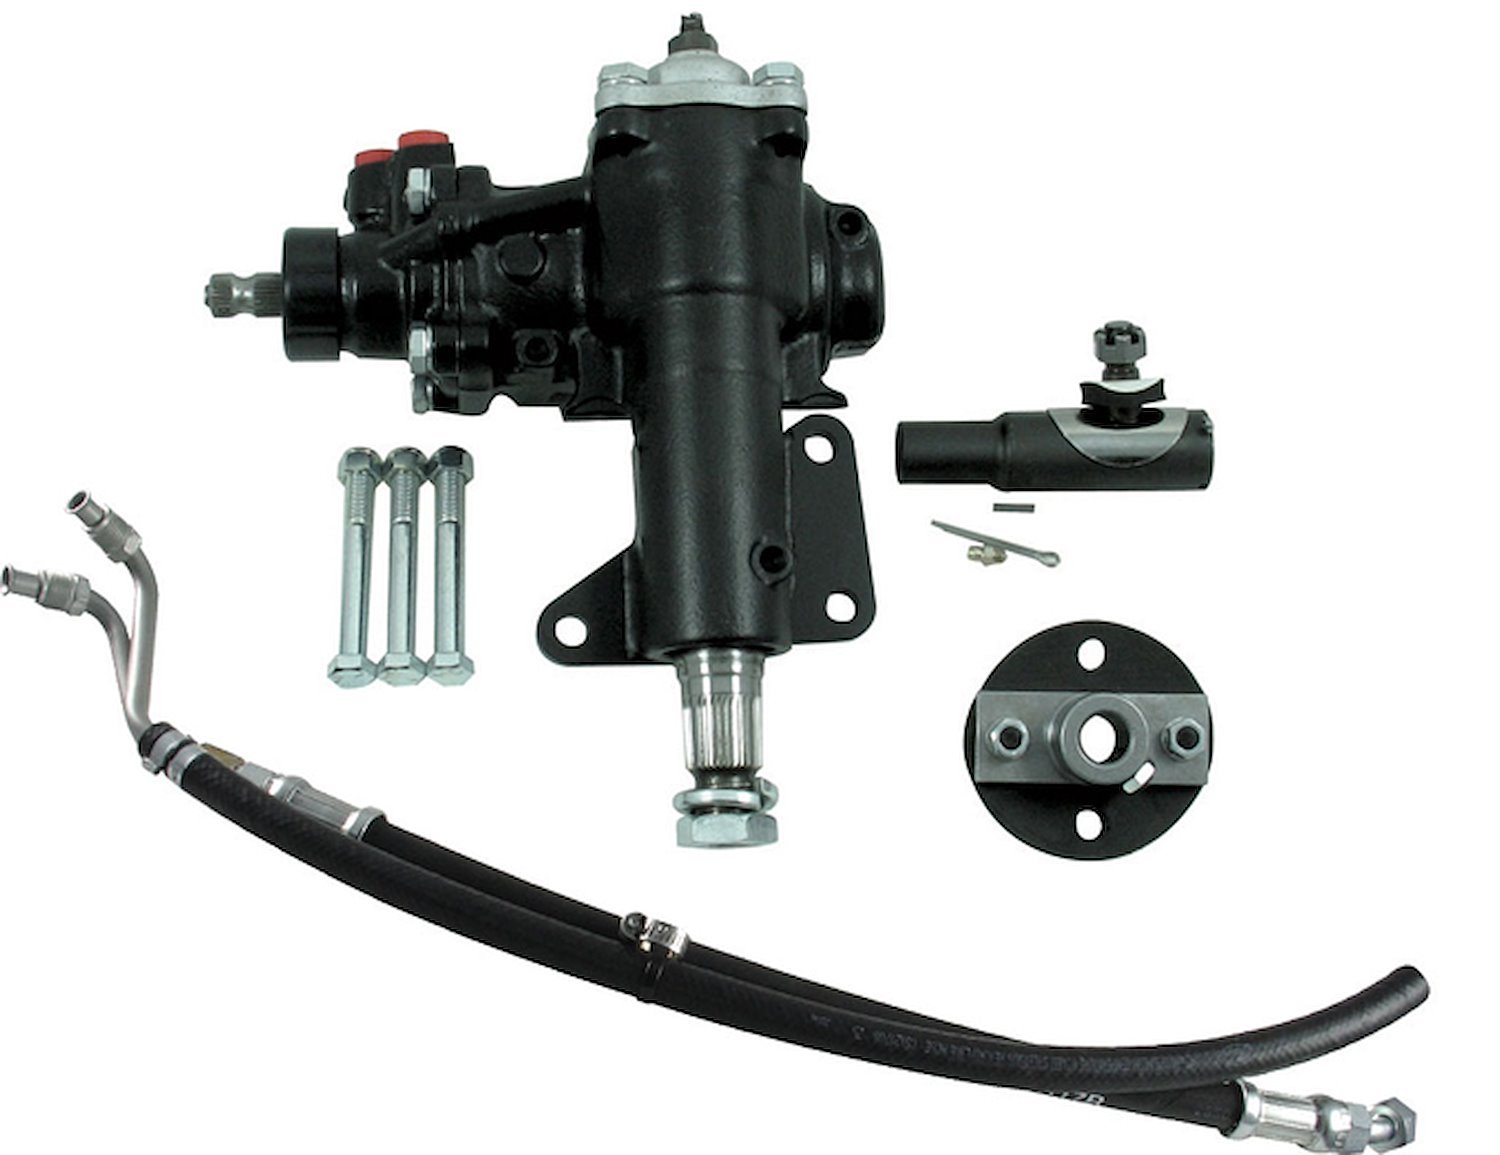 Power Steering Conversion Kit 1967-1977 Ford Mid-Size Cars